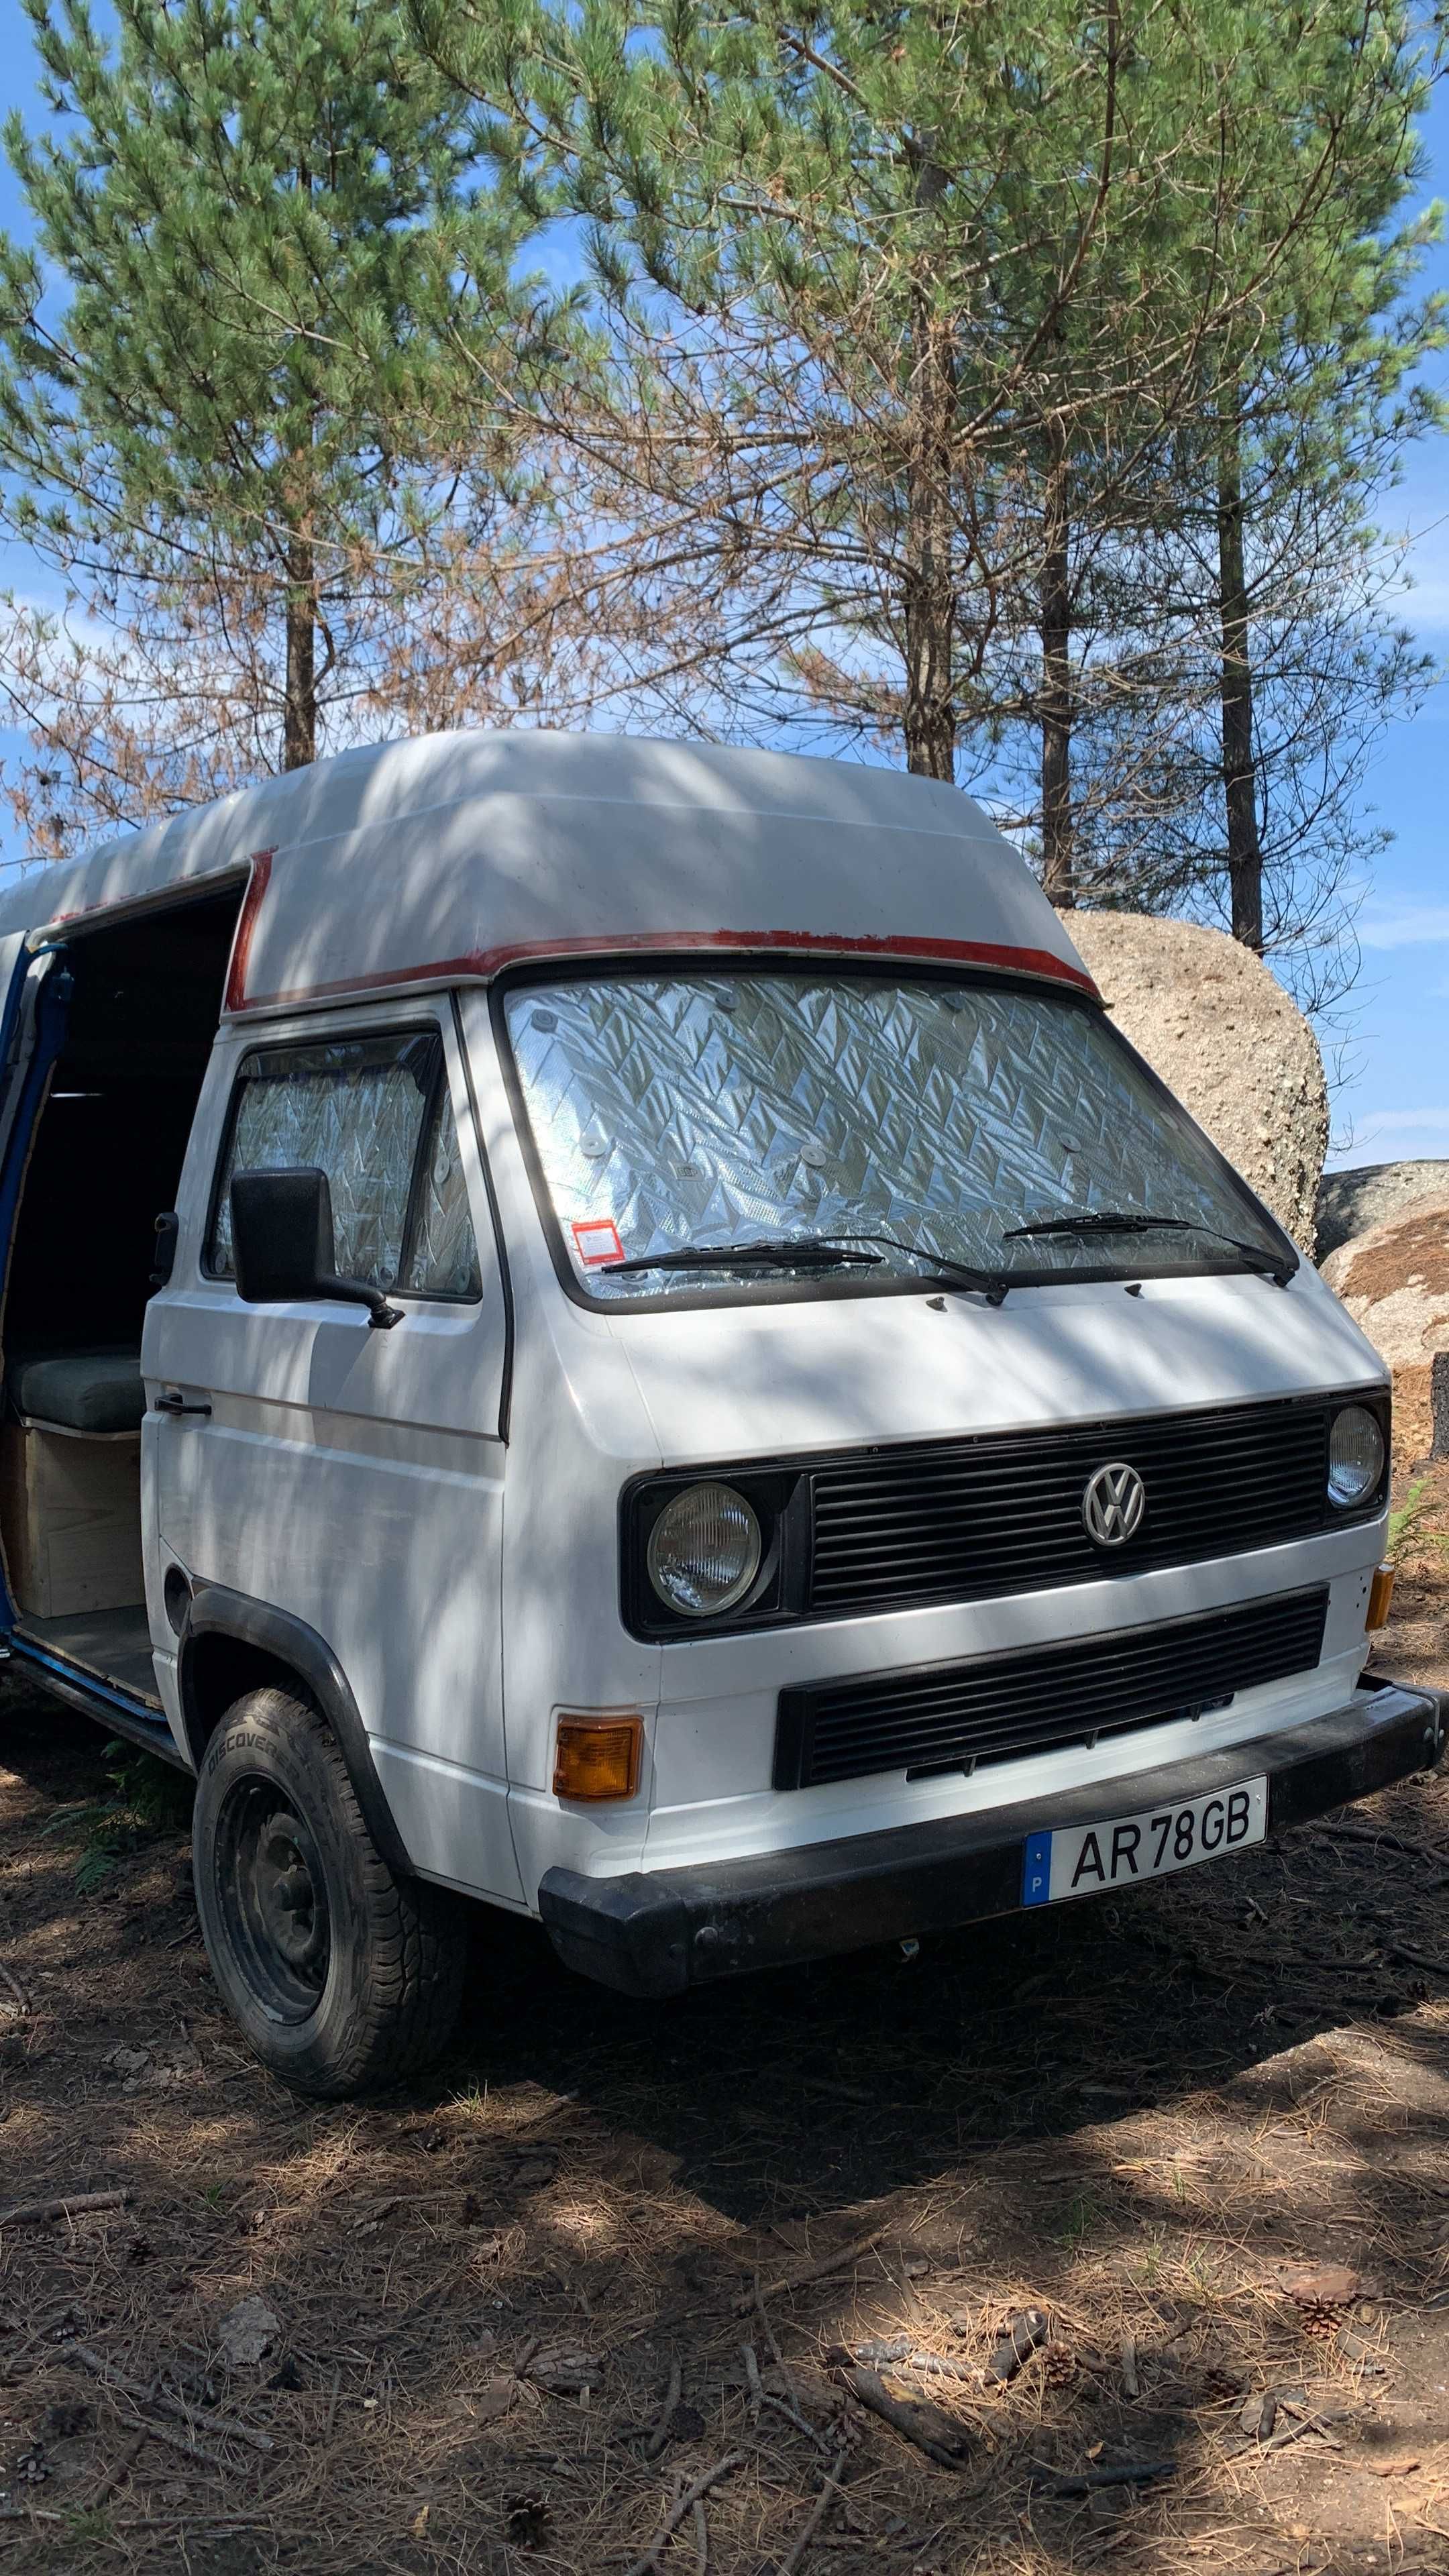 VW T3 (1992) with GTI 2.0 engine